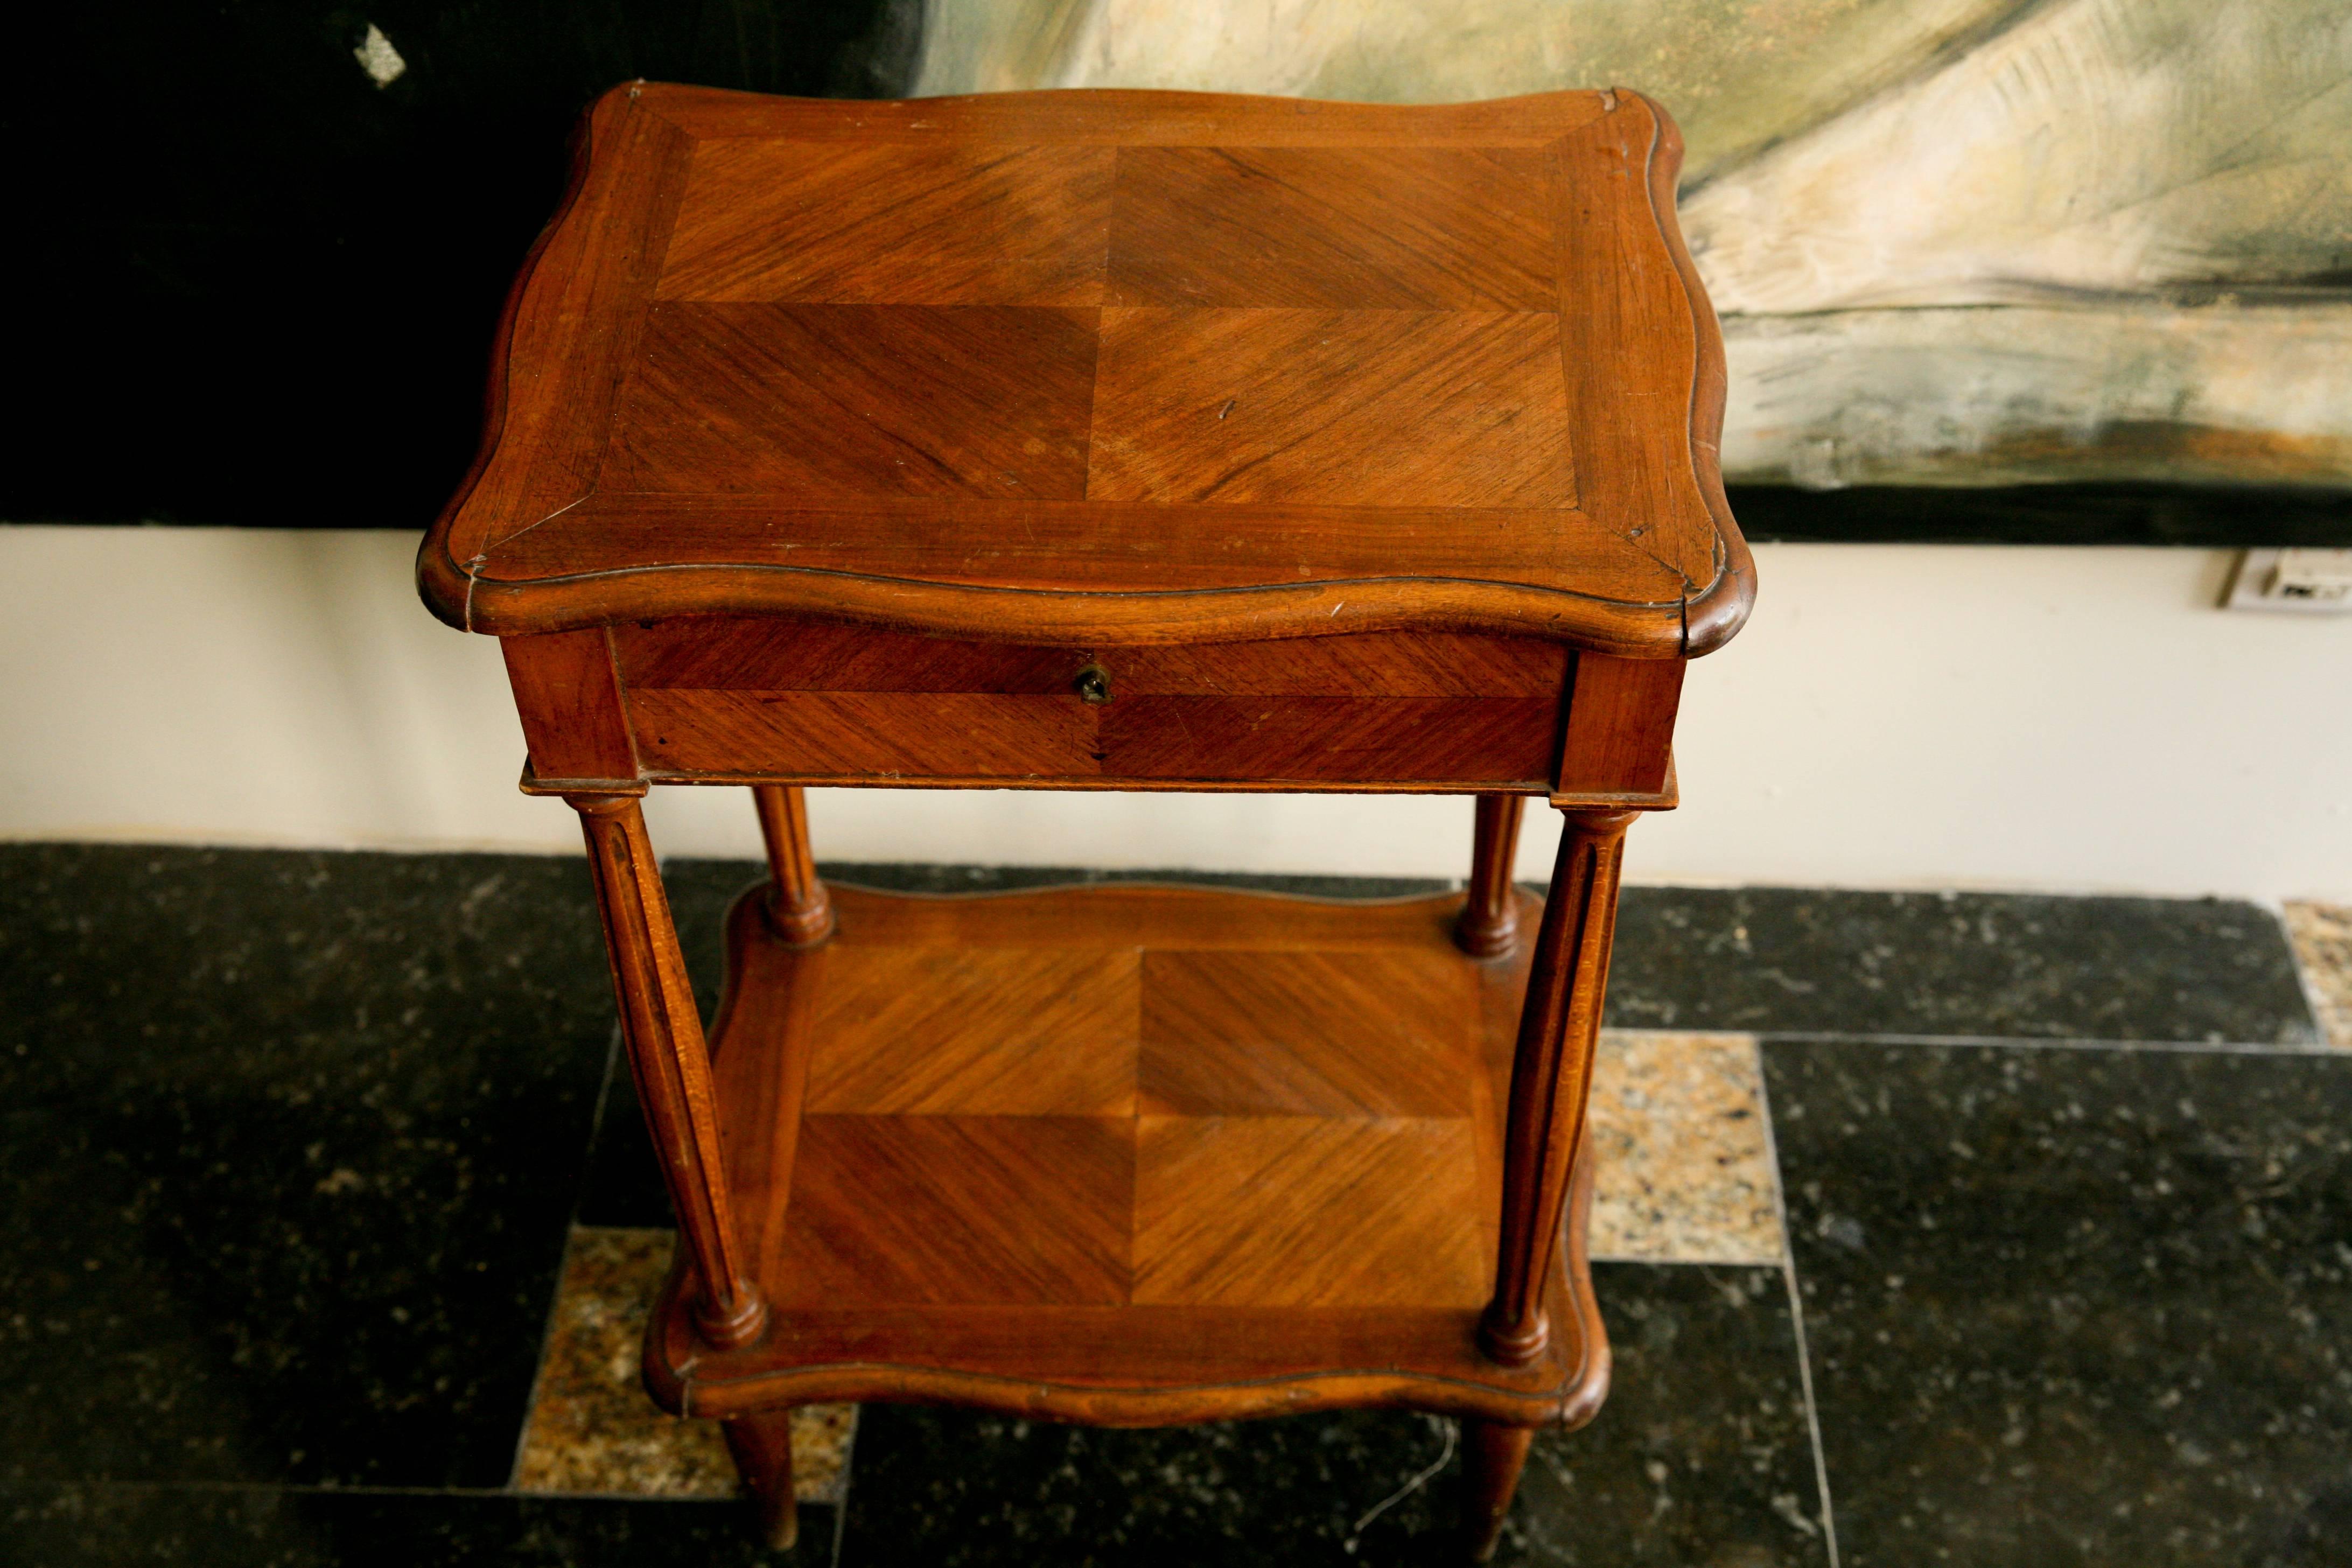 19th century French dressing work stand made of walnut veneer.
Top lifts to reveal original mirror in frame and compartments.
Very good condition for its age,
France, circa 1800.